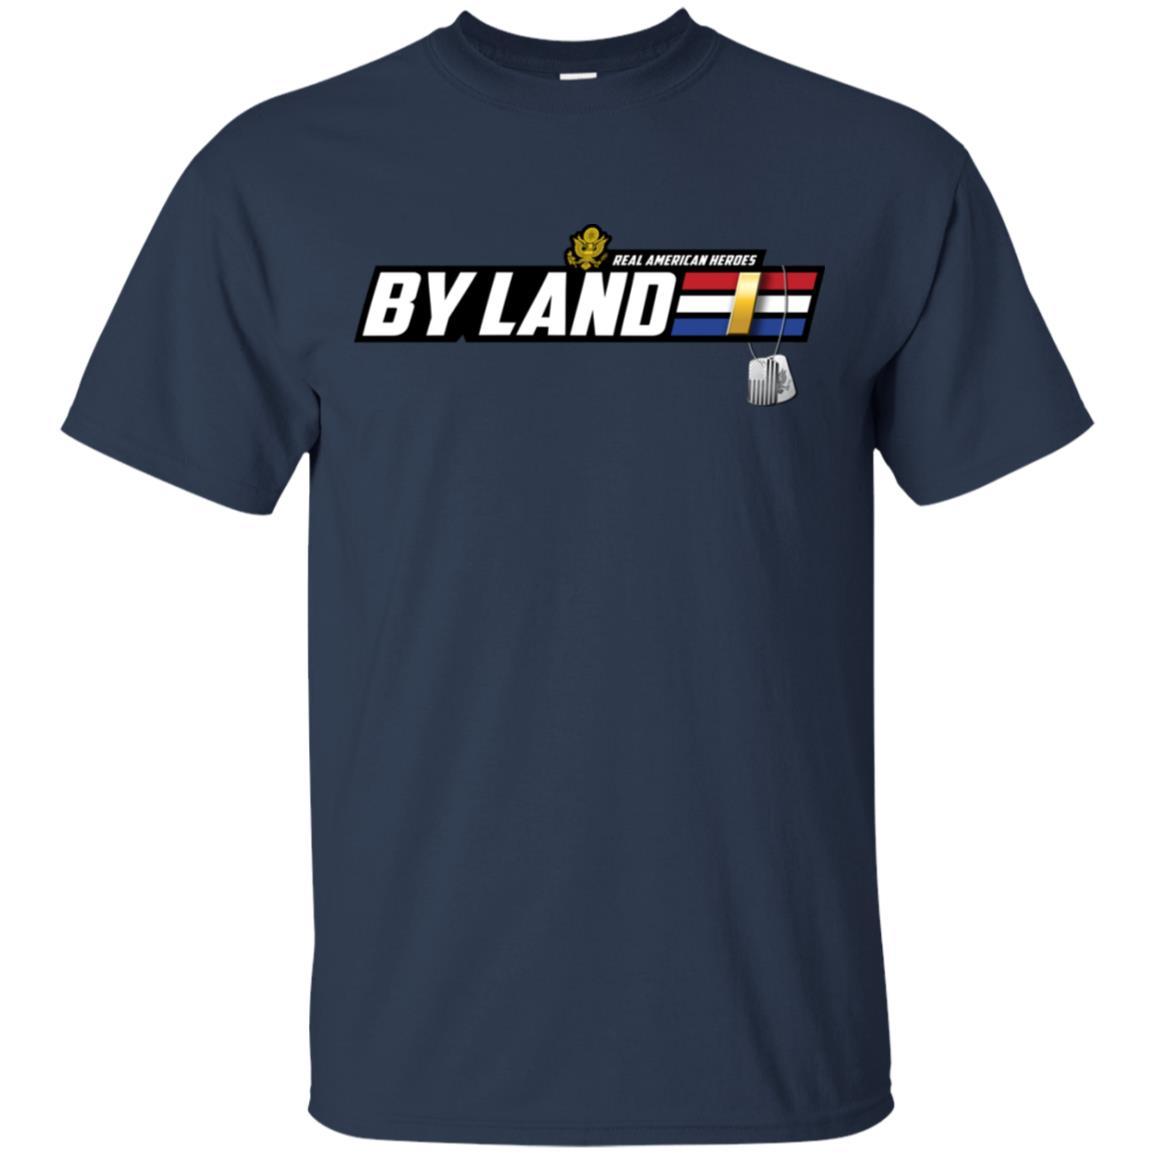 US Army T-Shirt "Real American Heroes By Land" O-1 Second Lieutenant(2LT) On Front-TShirt-Army-Veterans Nation